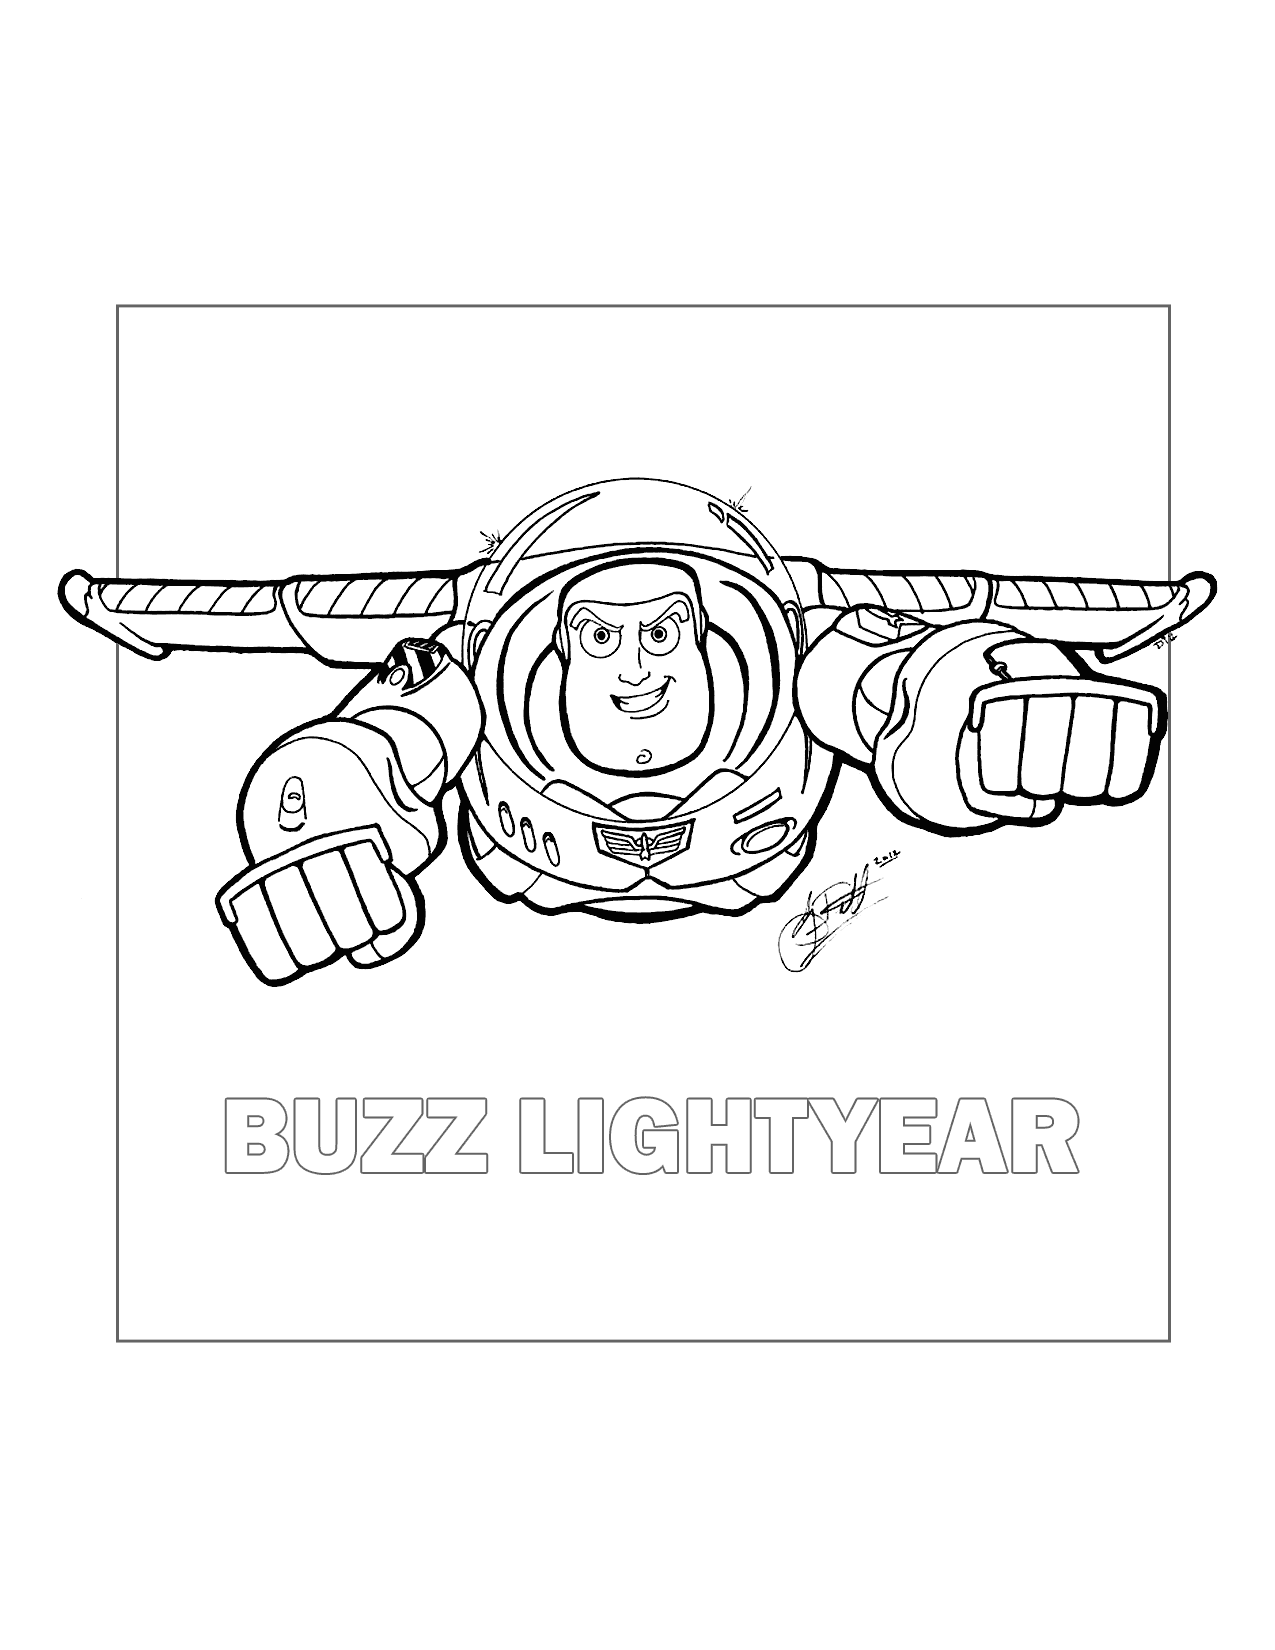 Cool Buzz Lightyear Coloring Pages